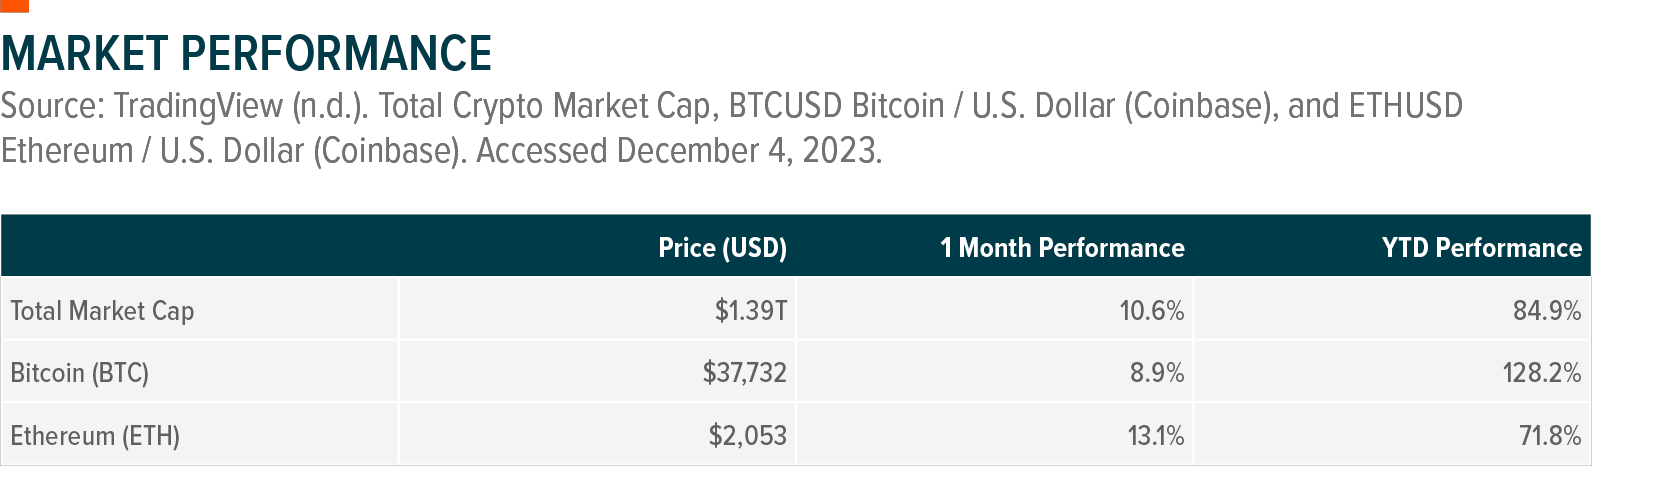 Table: Market Performance - Bitcoin and Ethereum